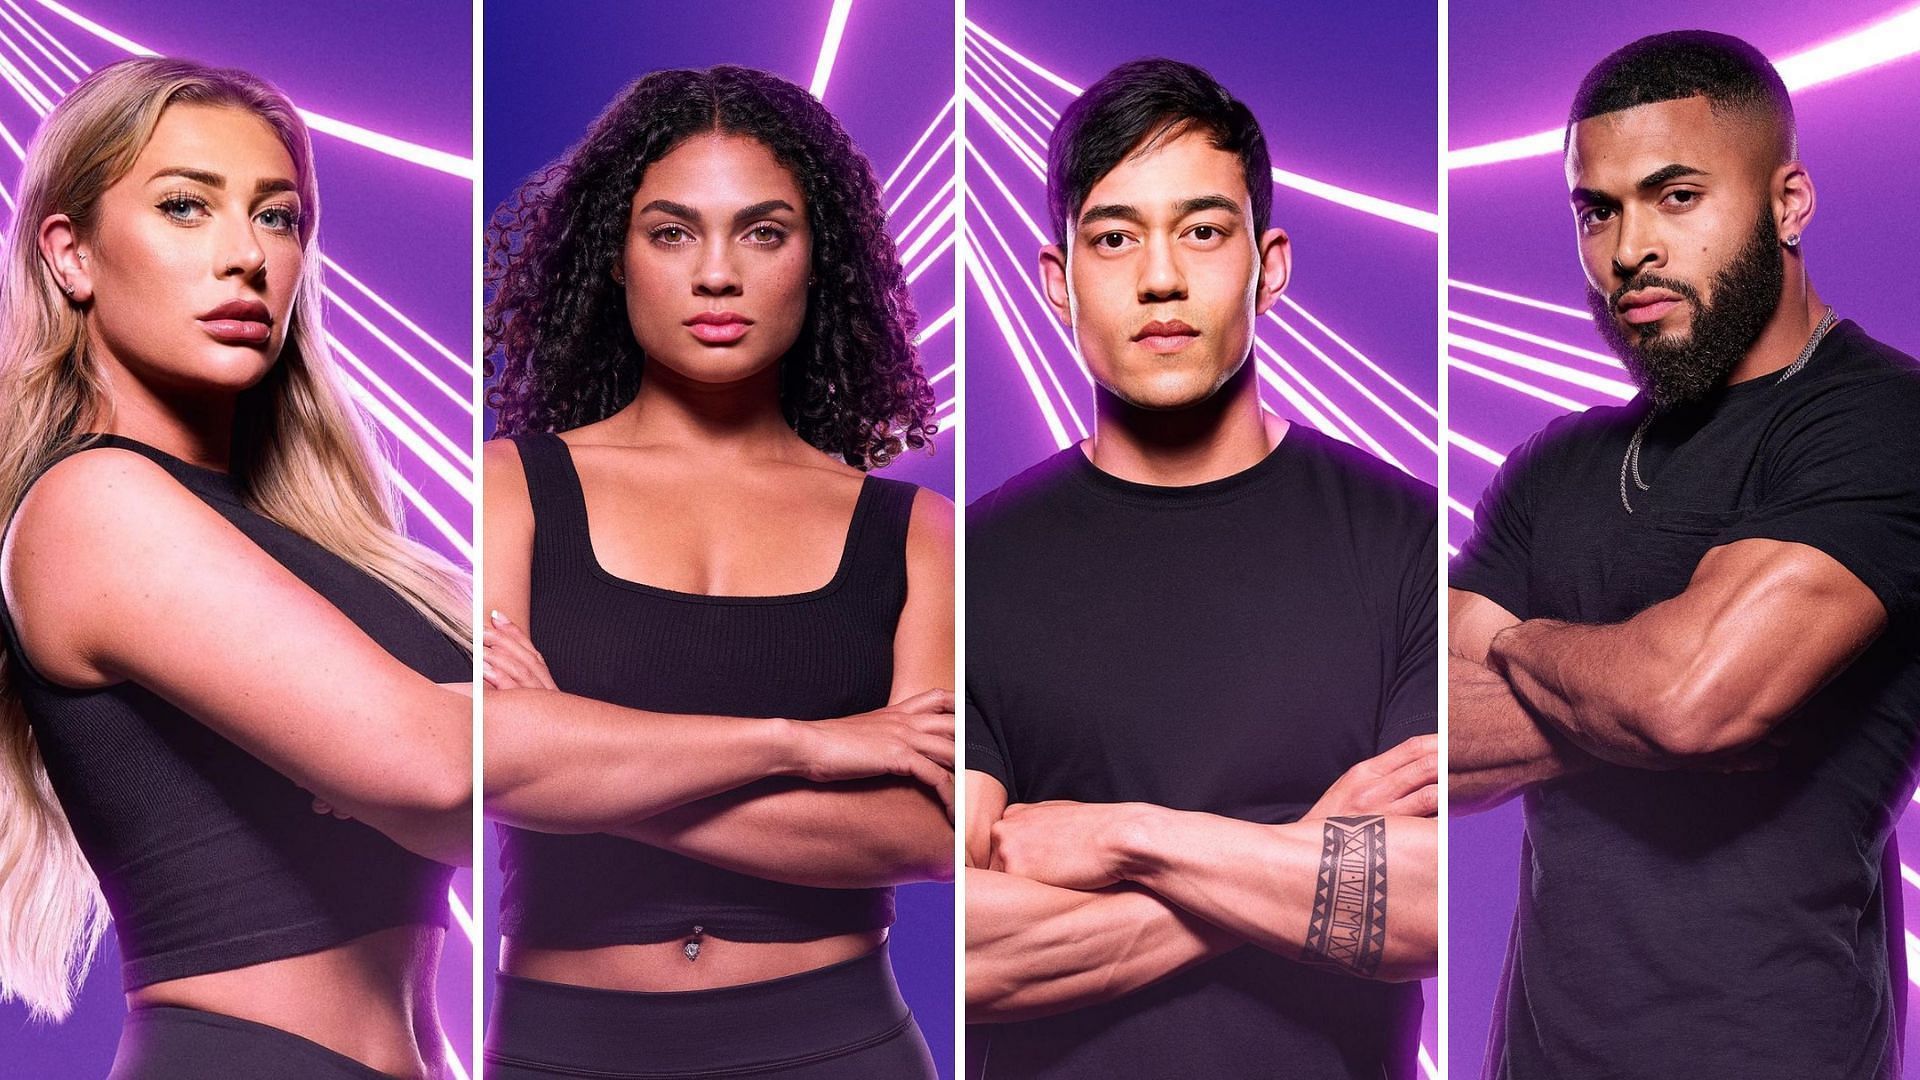 The Challenge: Ride or Dies features veterans and newbies